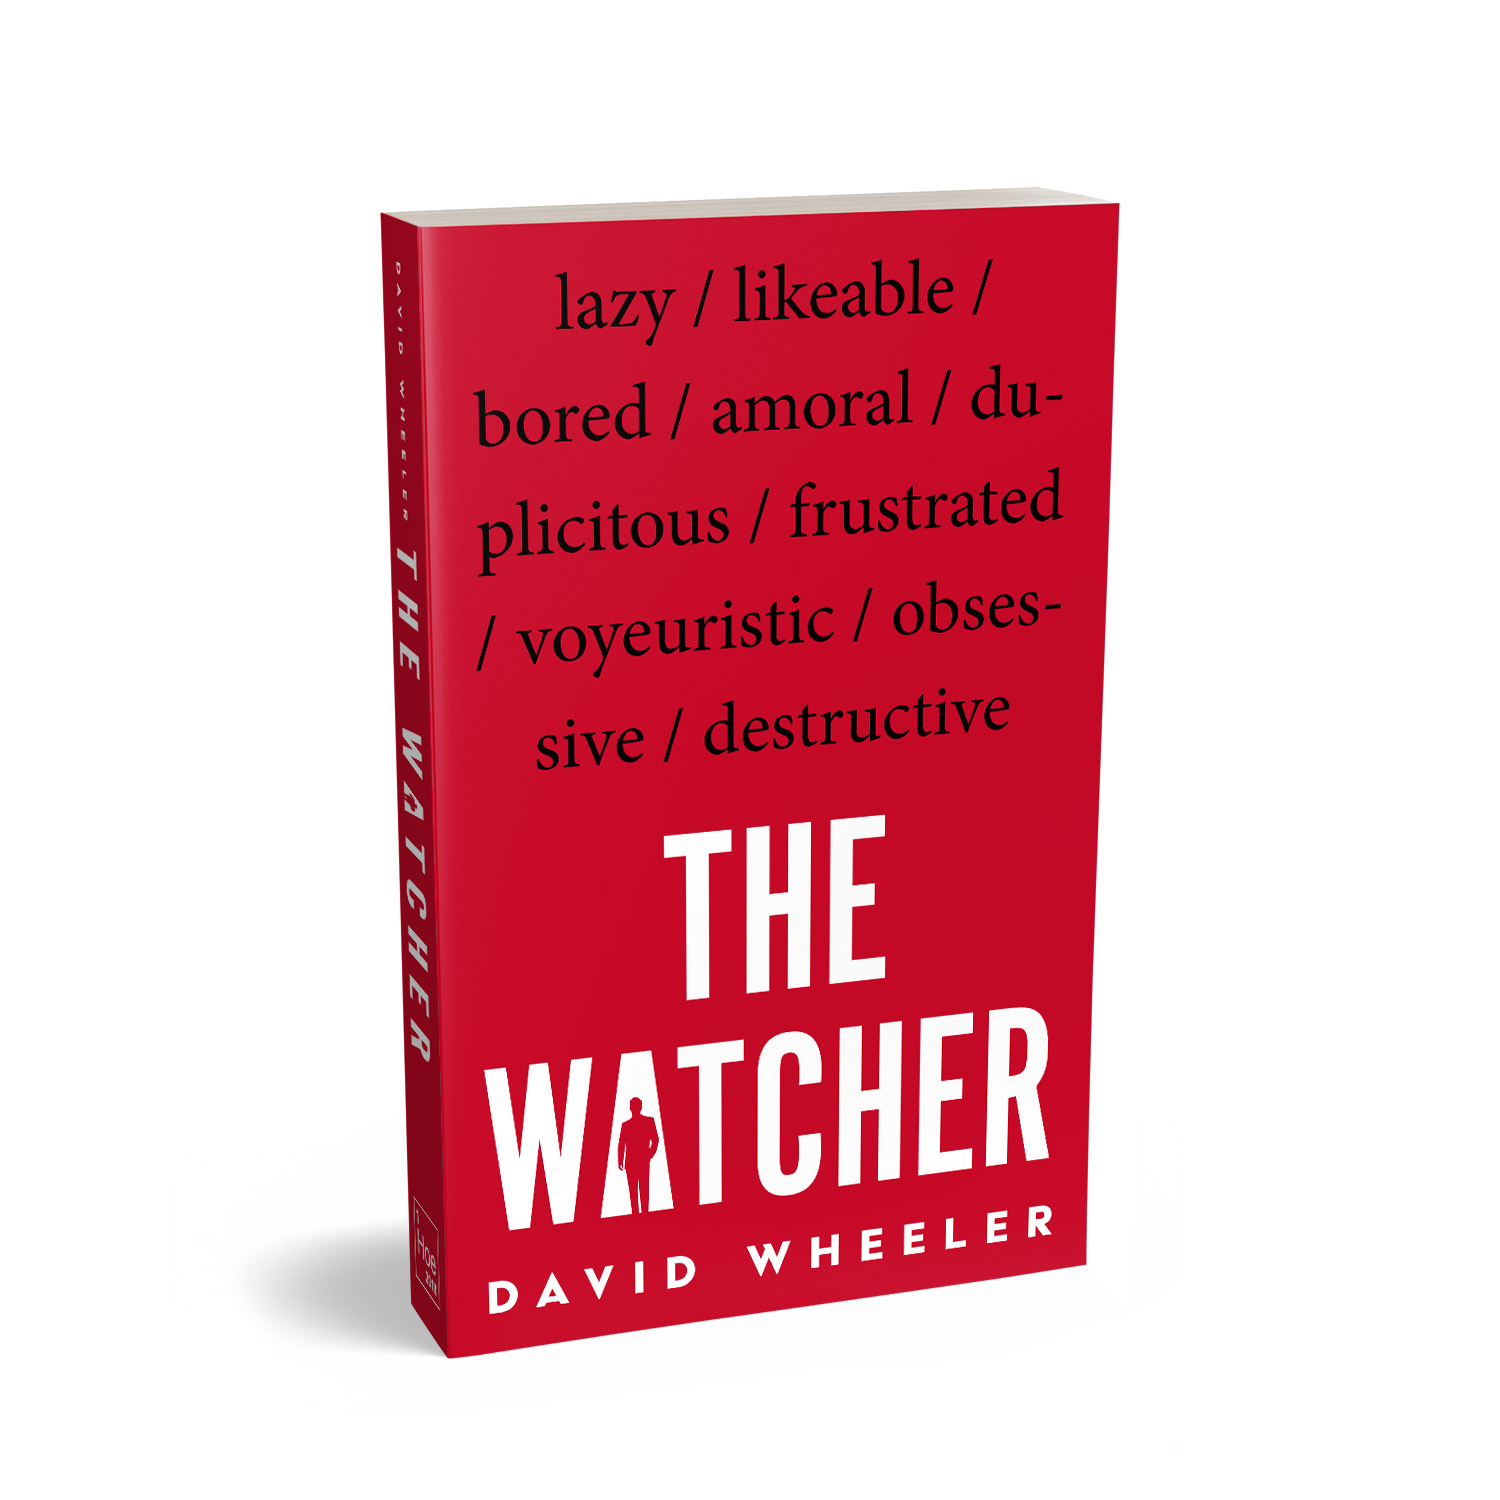 'The Watcher' is a cautionary tale of the perils of voyeurism. The author is David Wheeler. The book cover and interior were designed by Mark Thomas, of coverness.com. To find out more about my book design services, please visit www.coverness.com.